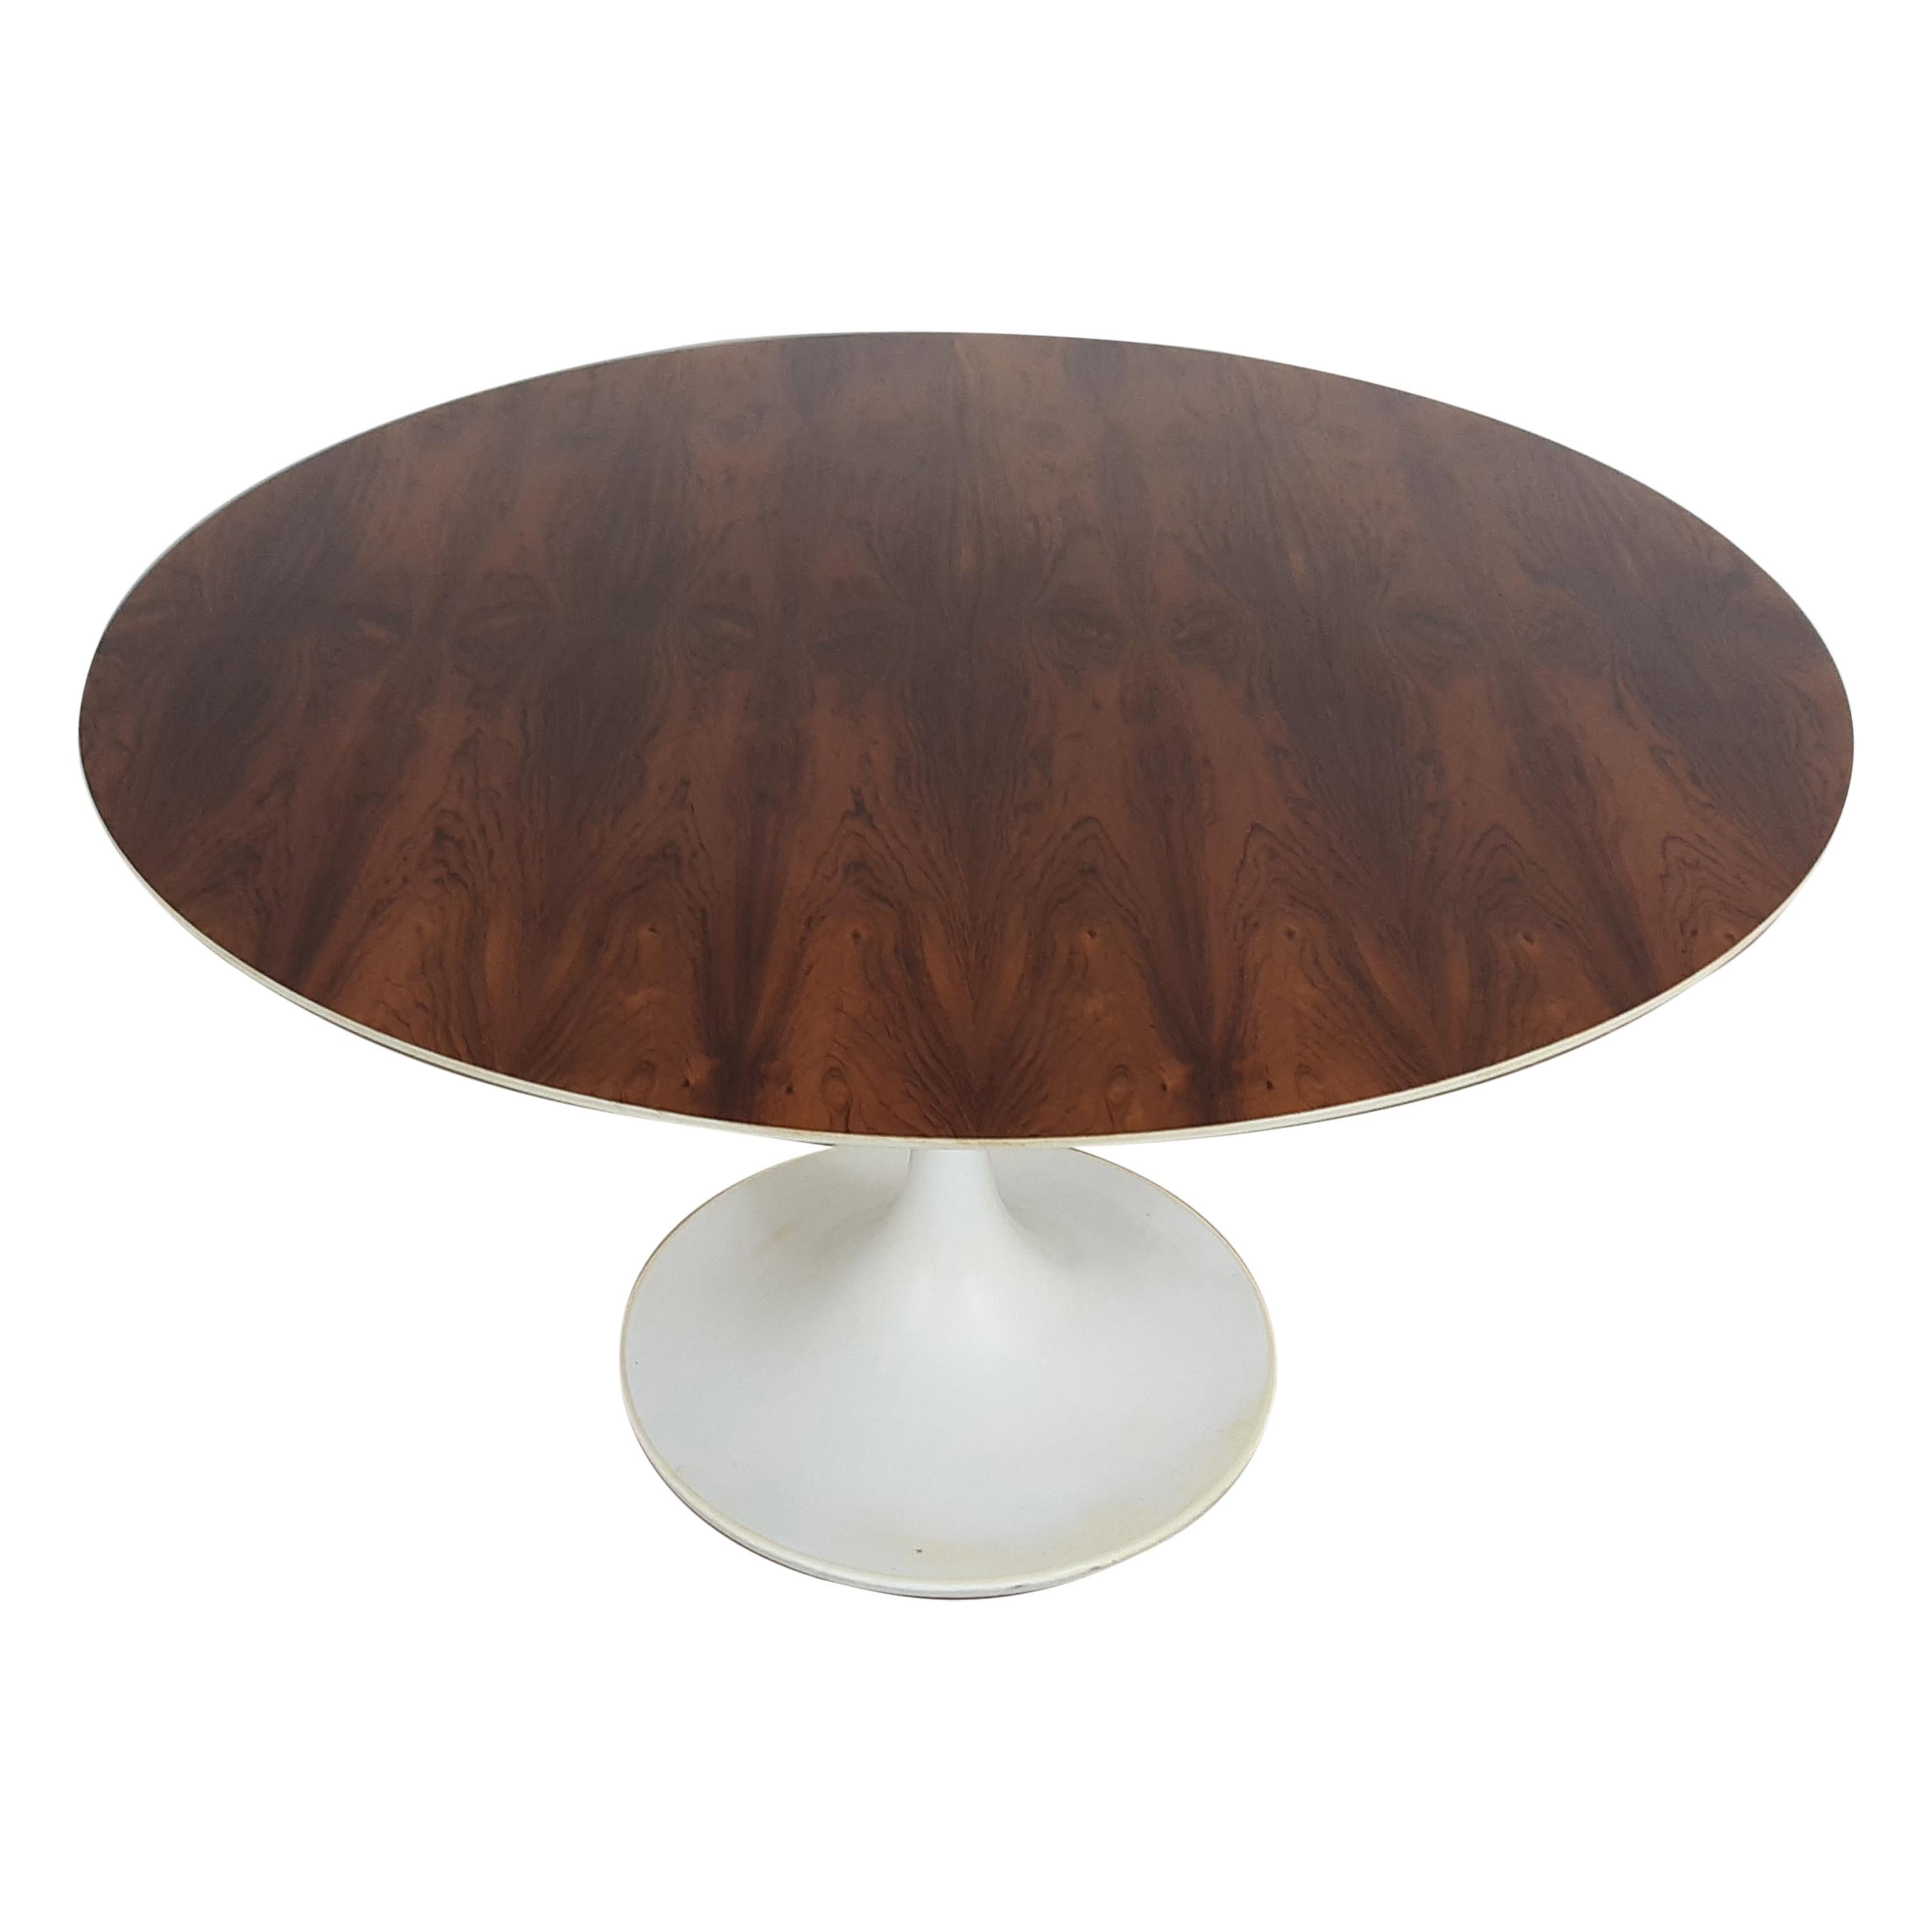 British Midcentury Rosewood Tulip Table For Sale